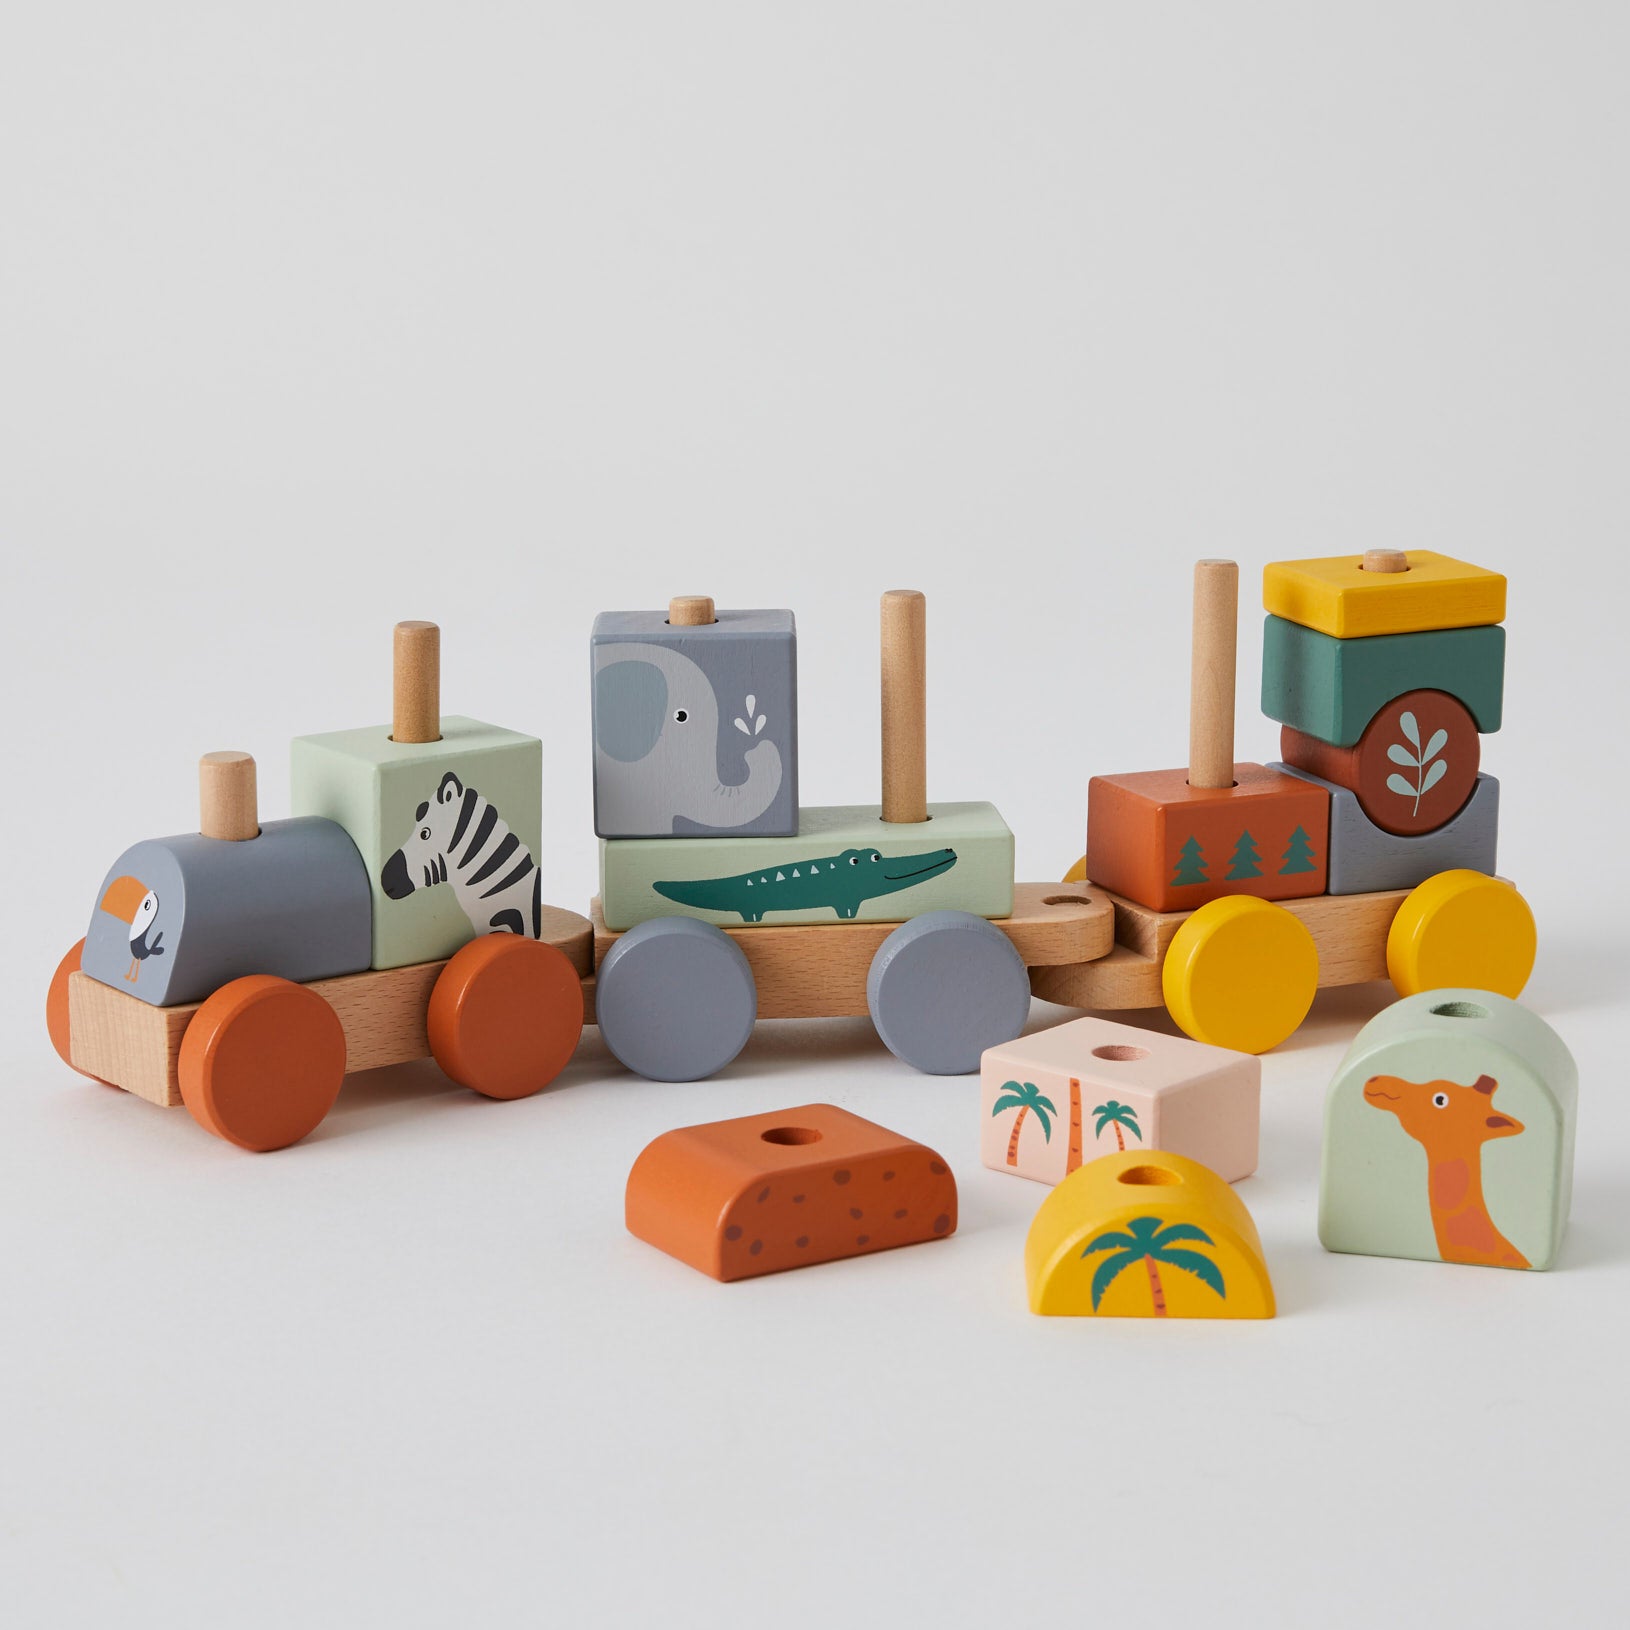 wooden baby train set - angus and dudley